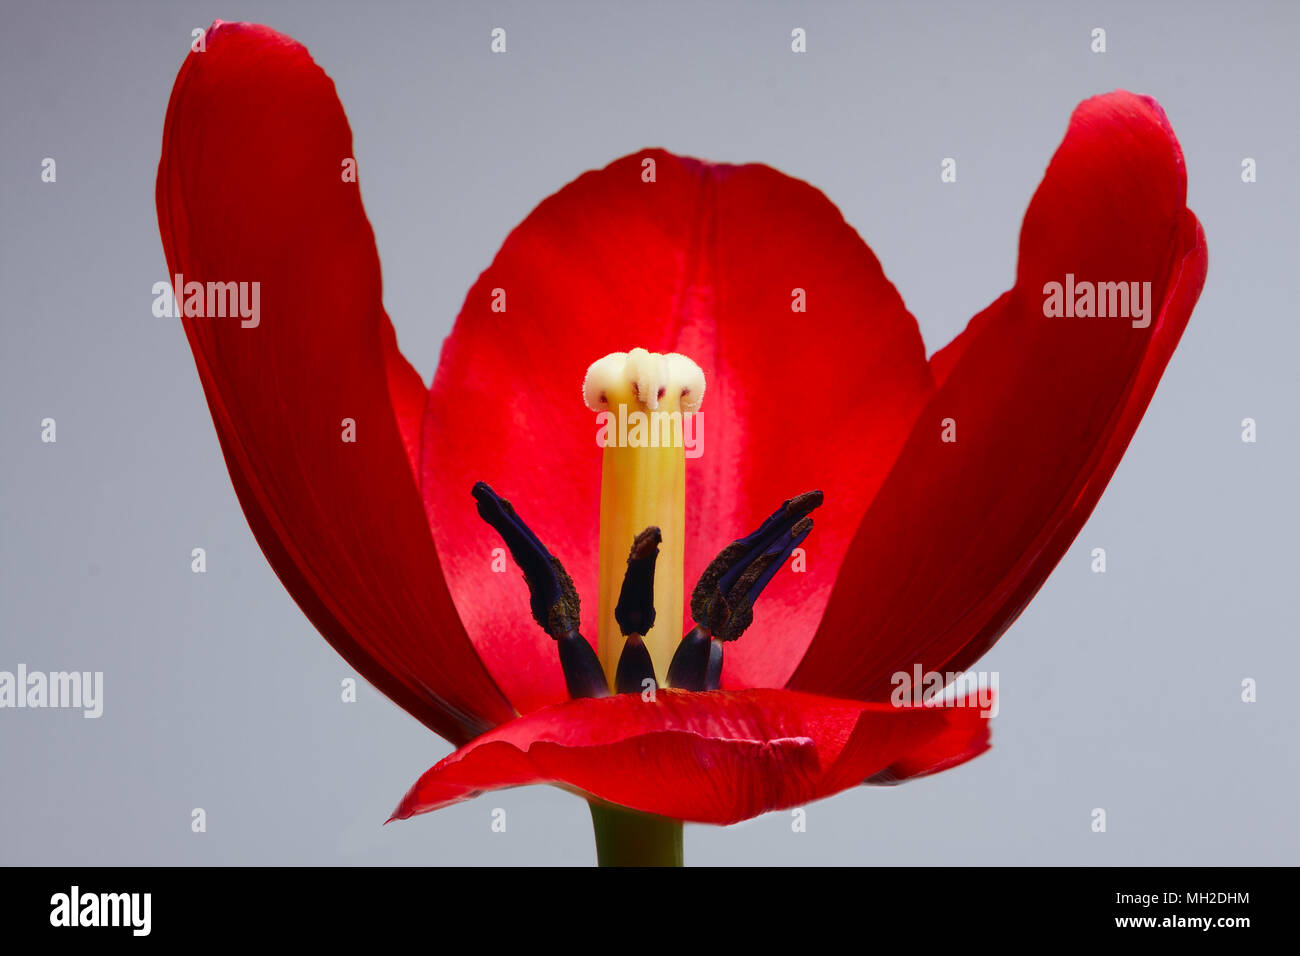 Closeup view on center of a red tulip blossom with seeds Stock Photo